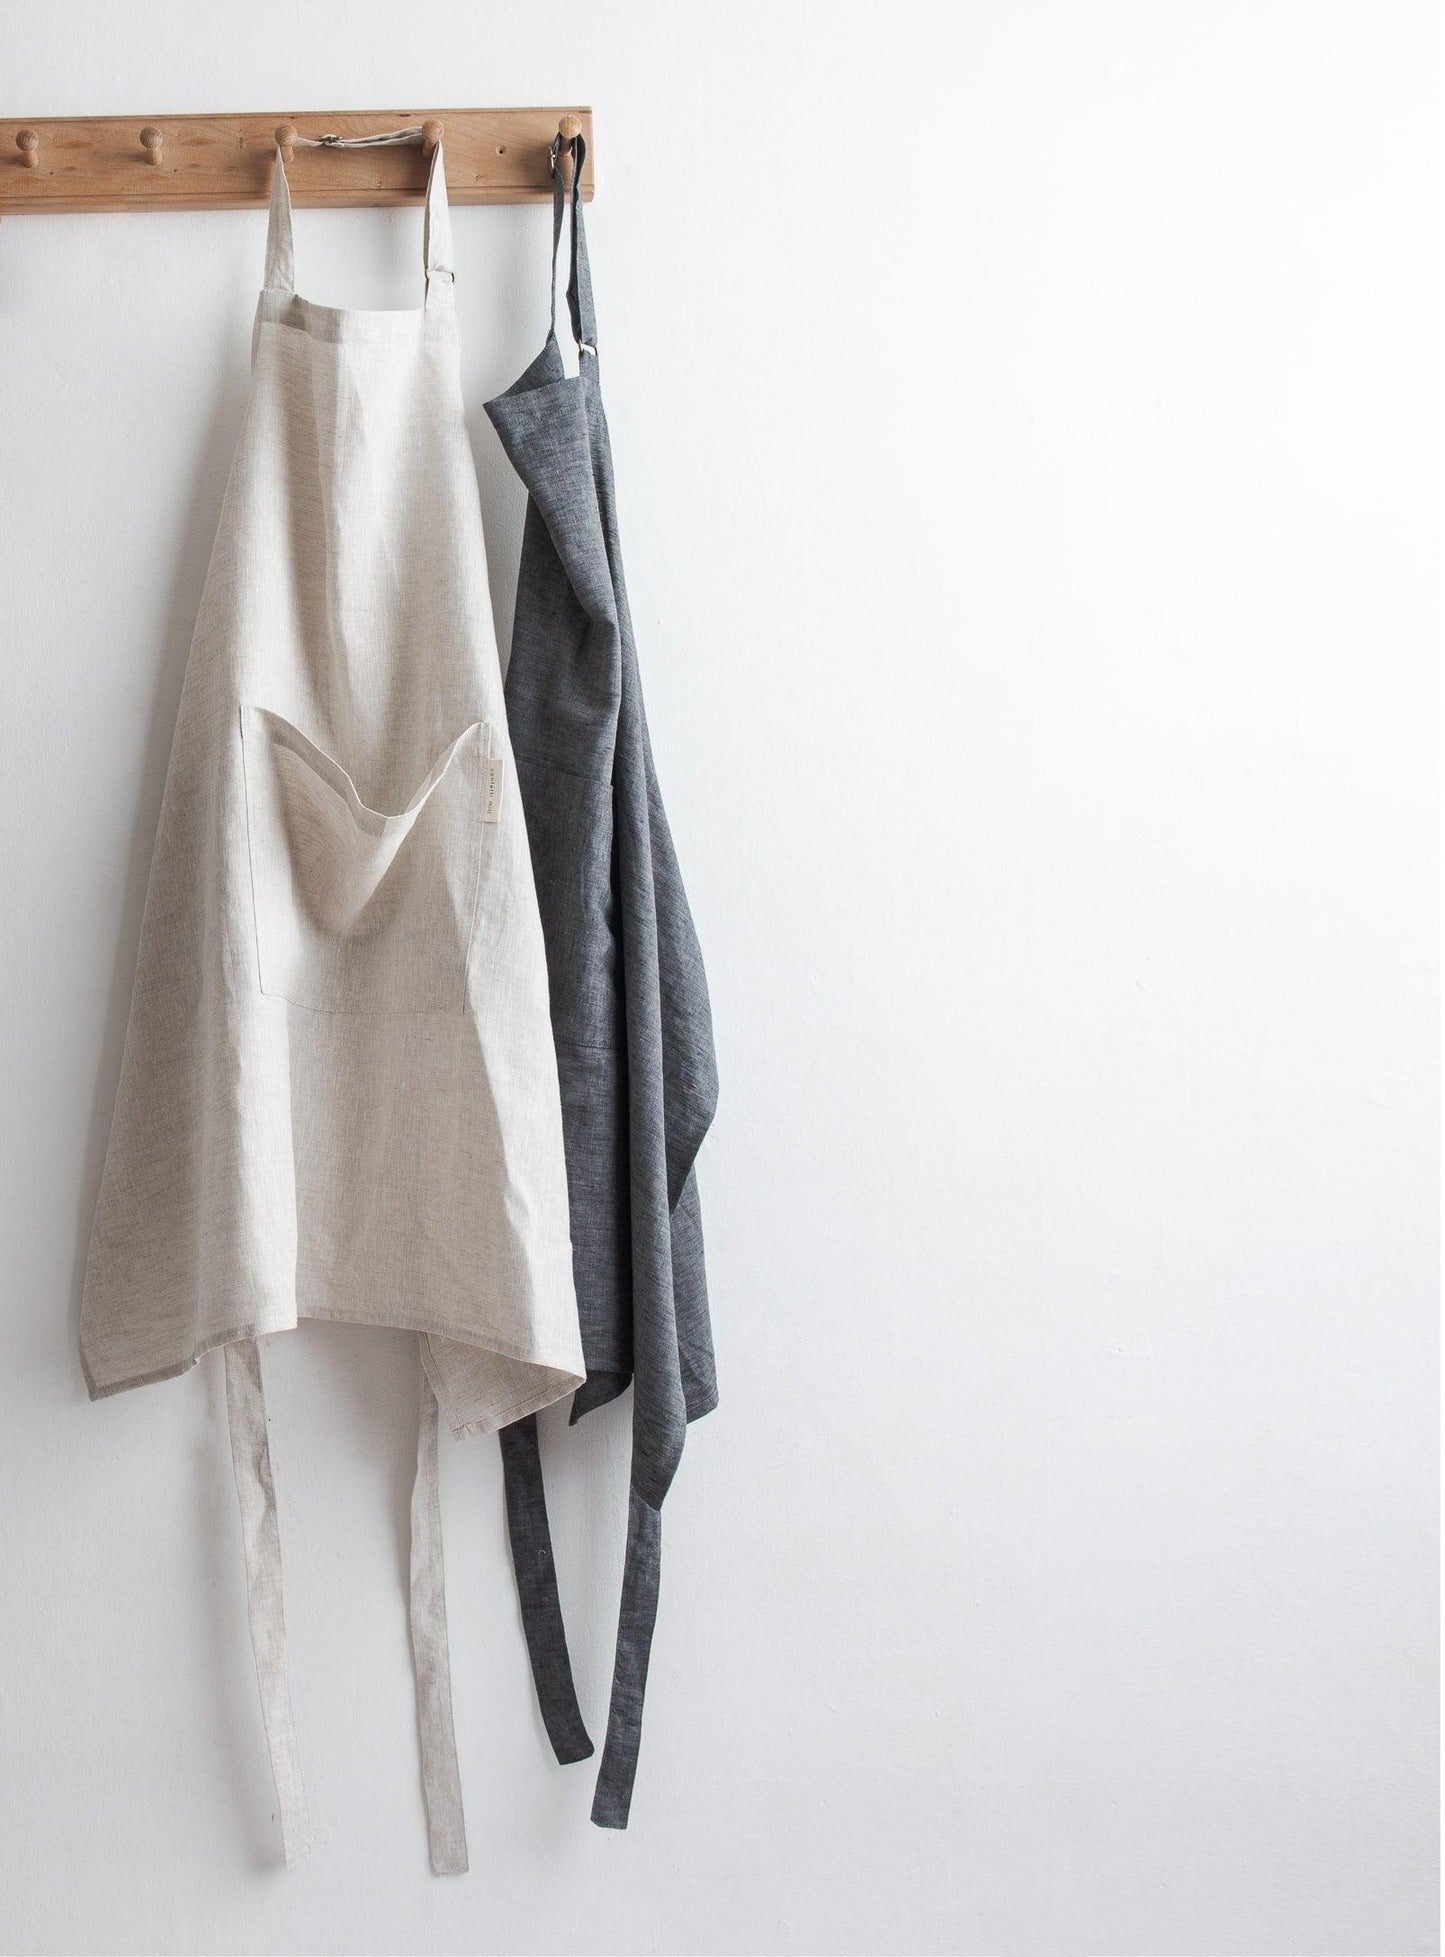 one beige and one grey apron hung on a wooden peg rail